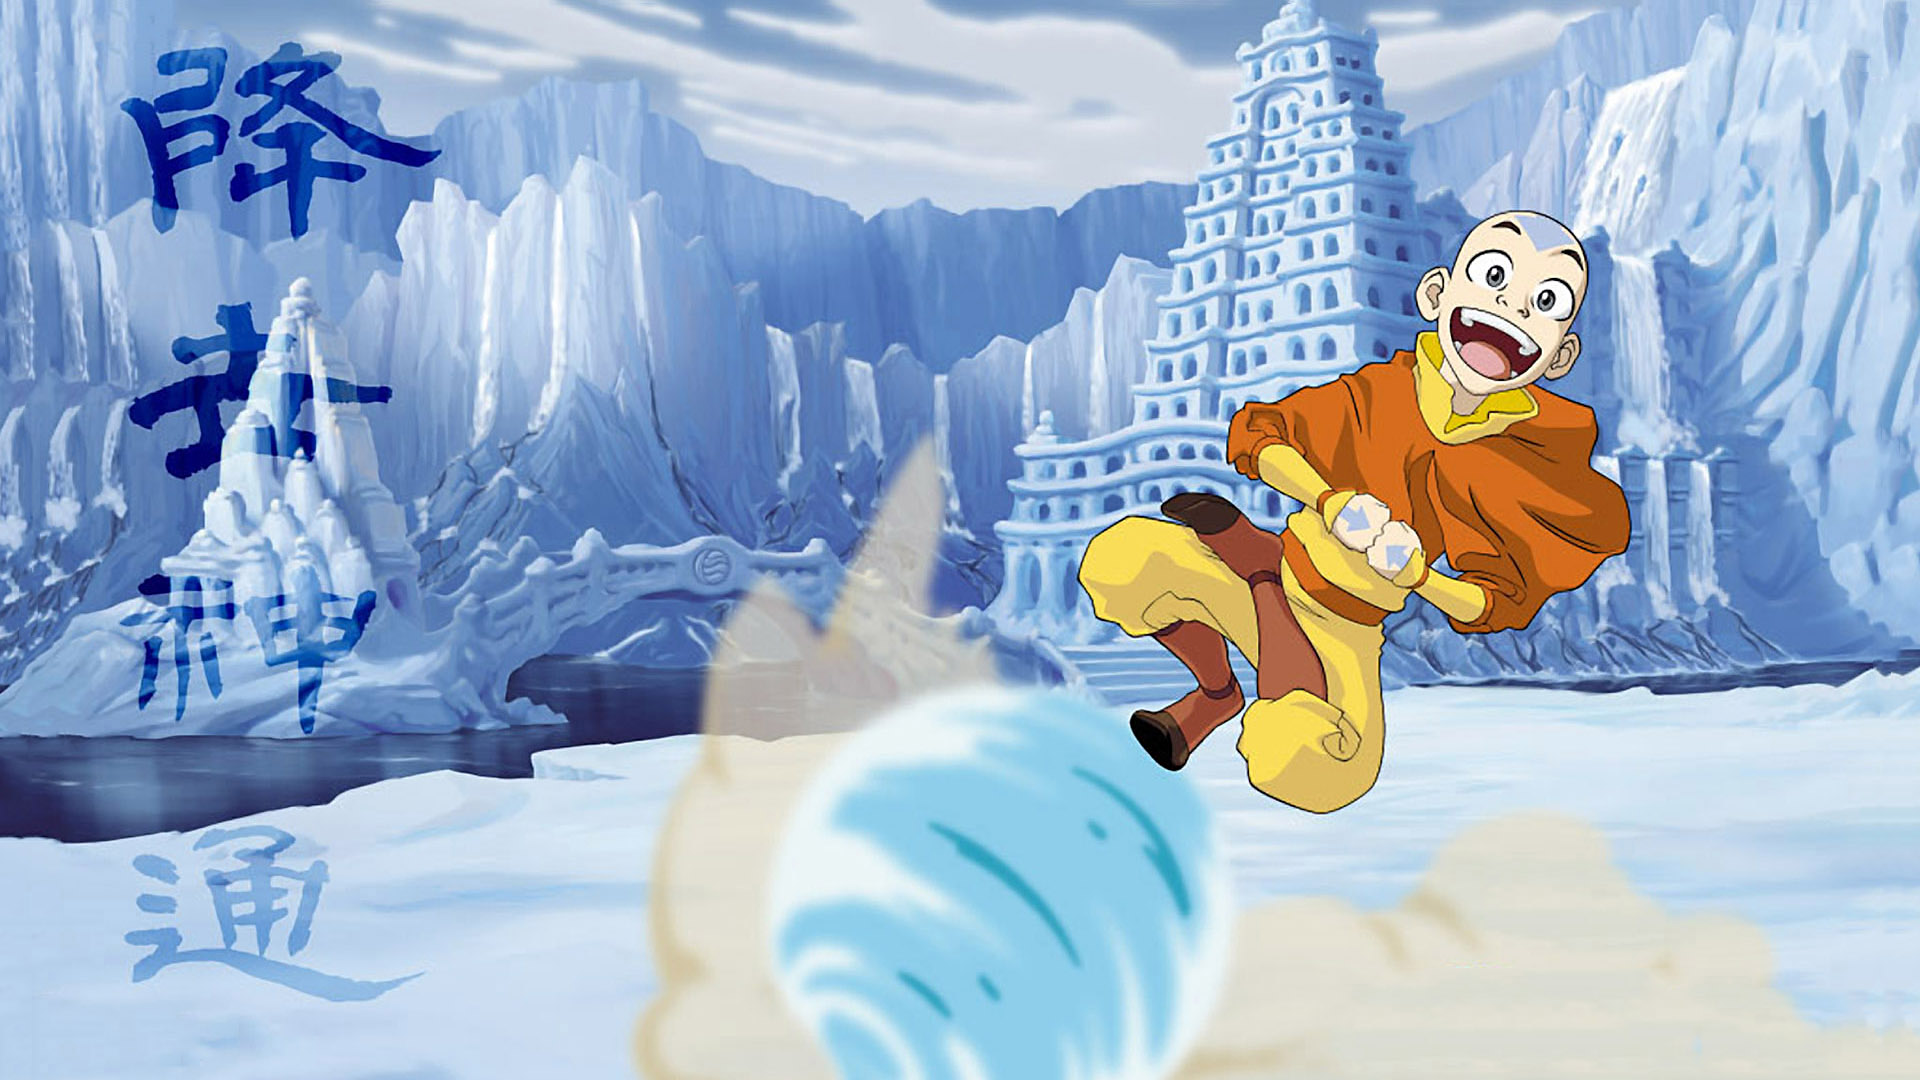 Anime Avatar: The Last Airbender HD Wallpaper | Background Image